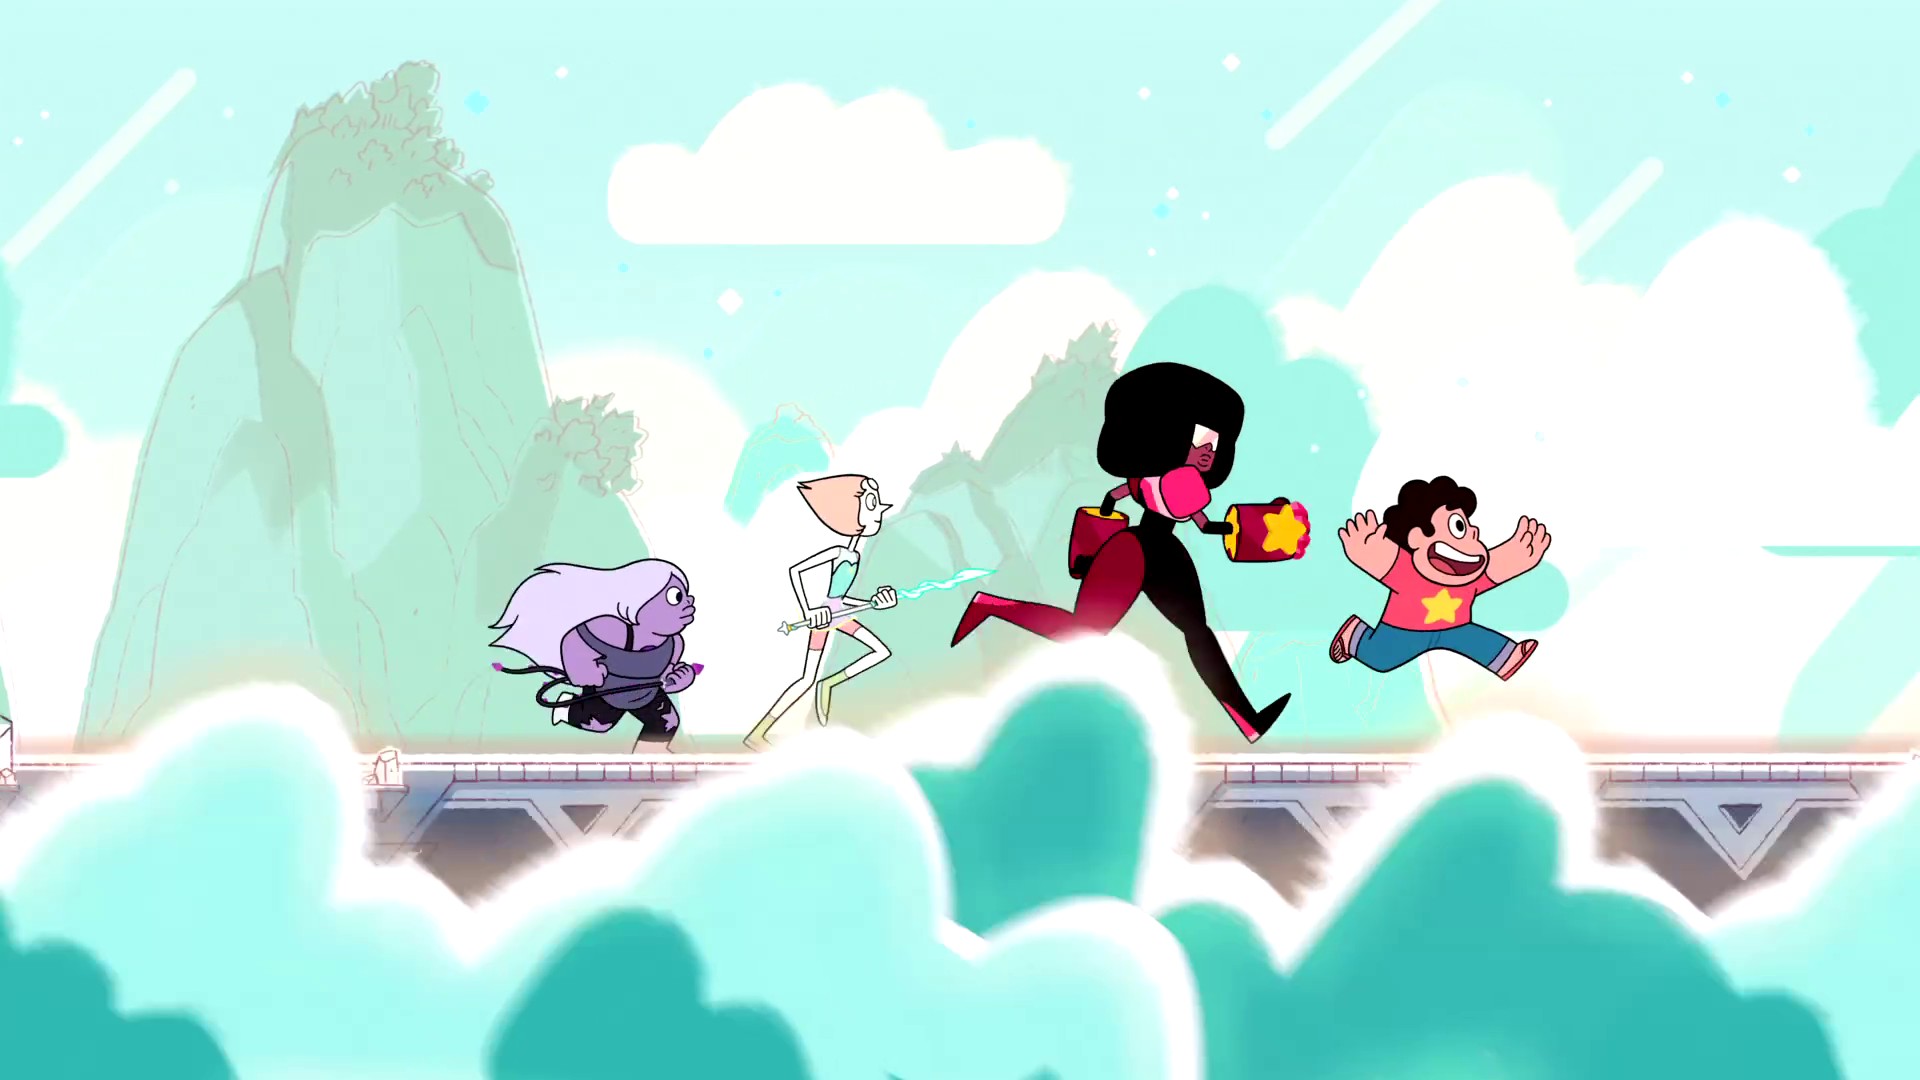 Steven Universe Background Wallpaper HD With high-resolution 1920X1080 pixel. You can use this wallpaper for your Desktop Computer Backgrounds, Mac Wallpapers, Android Lock screen or iPhone Screensavers and another smartphone device